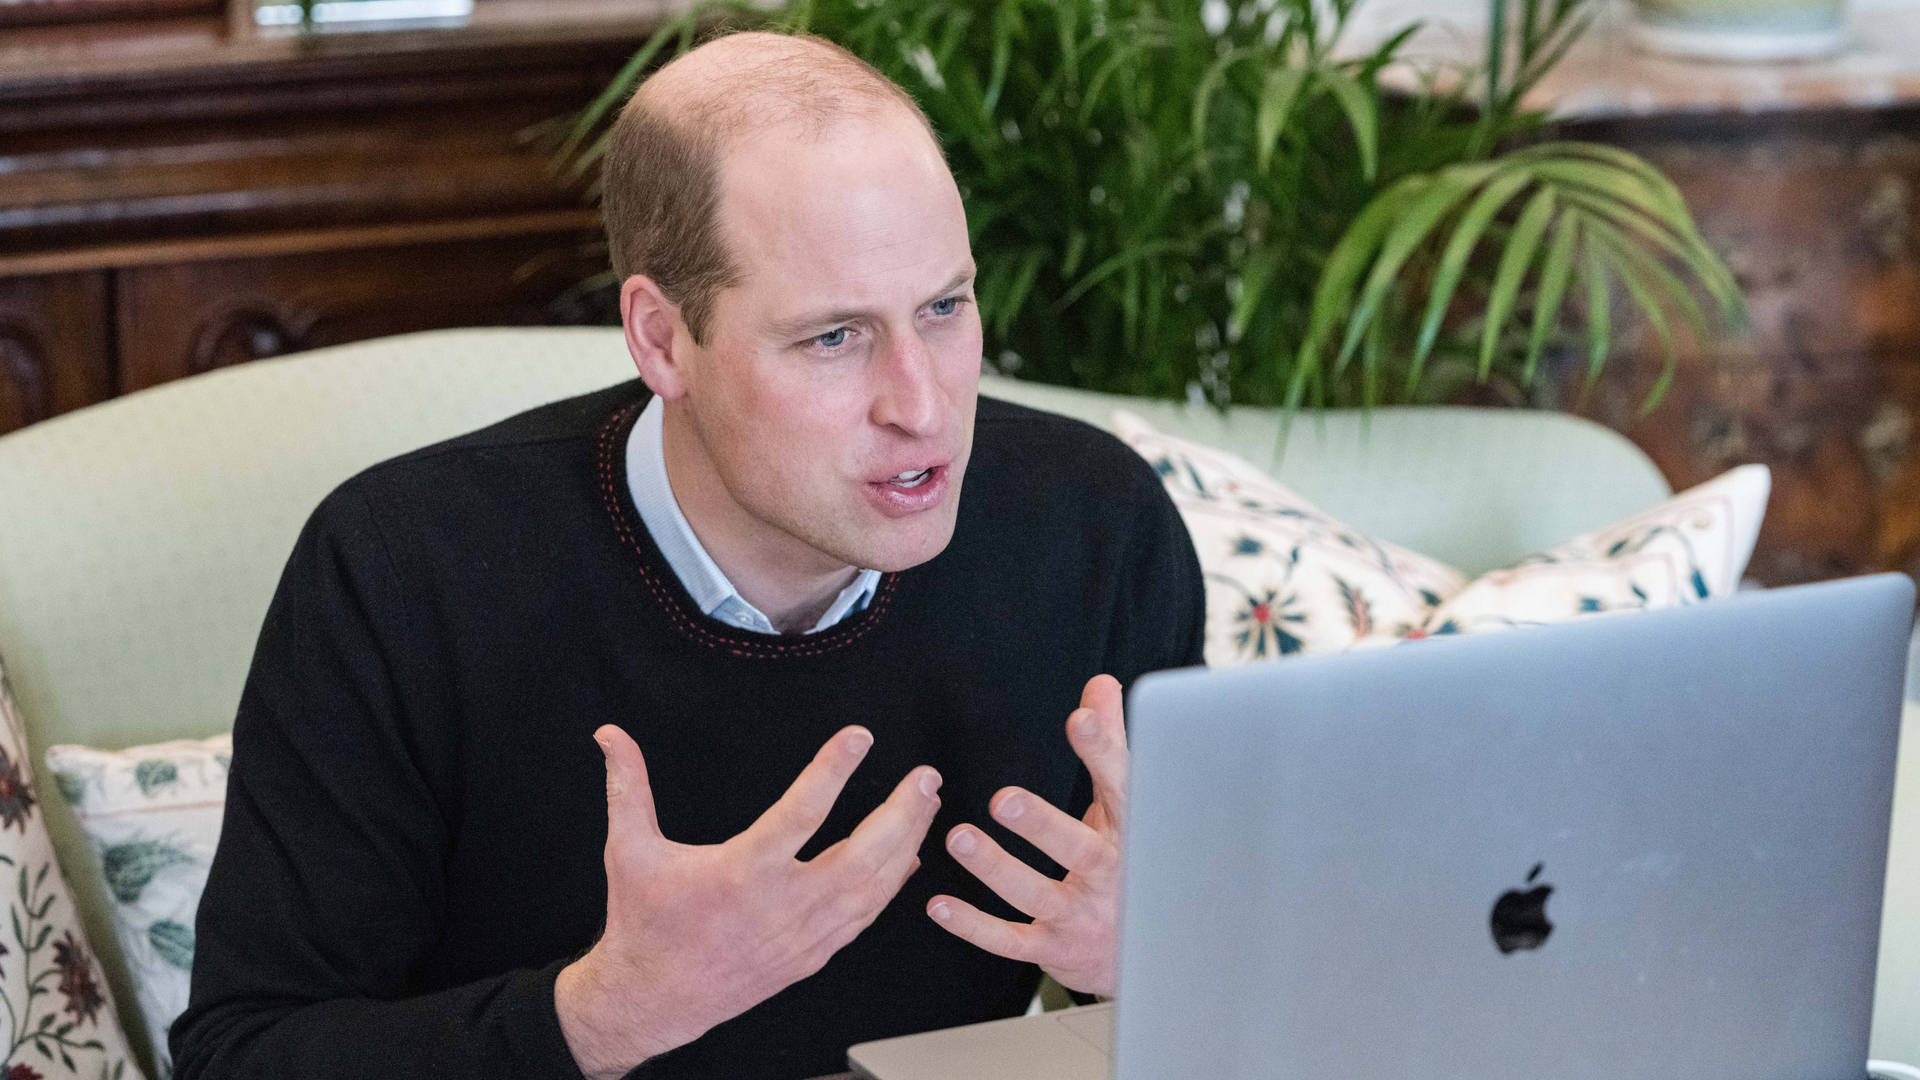 Prince William With Macbook Background